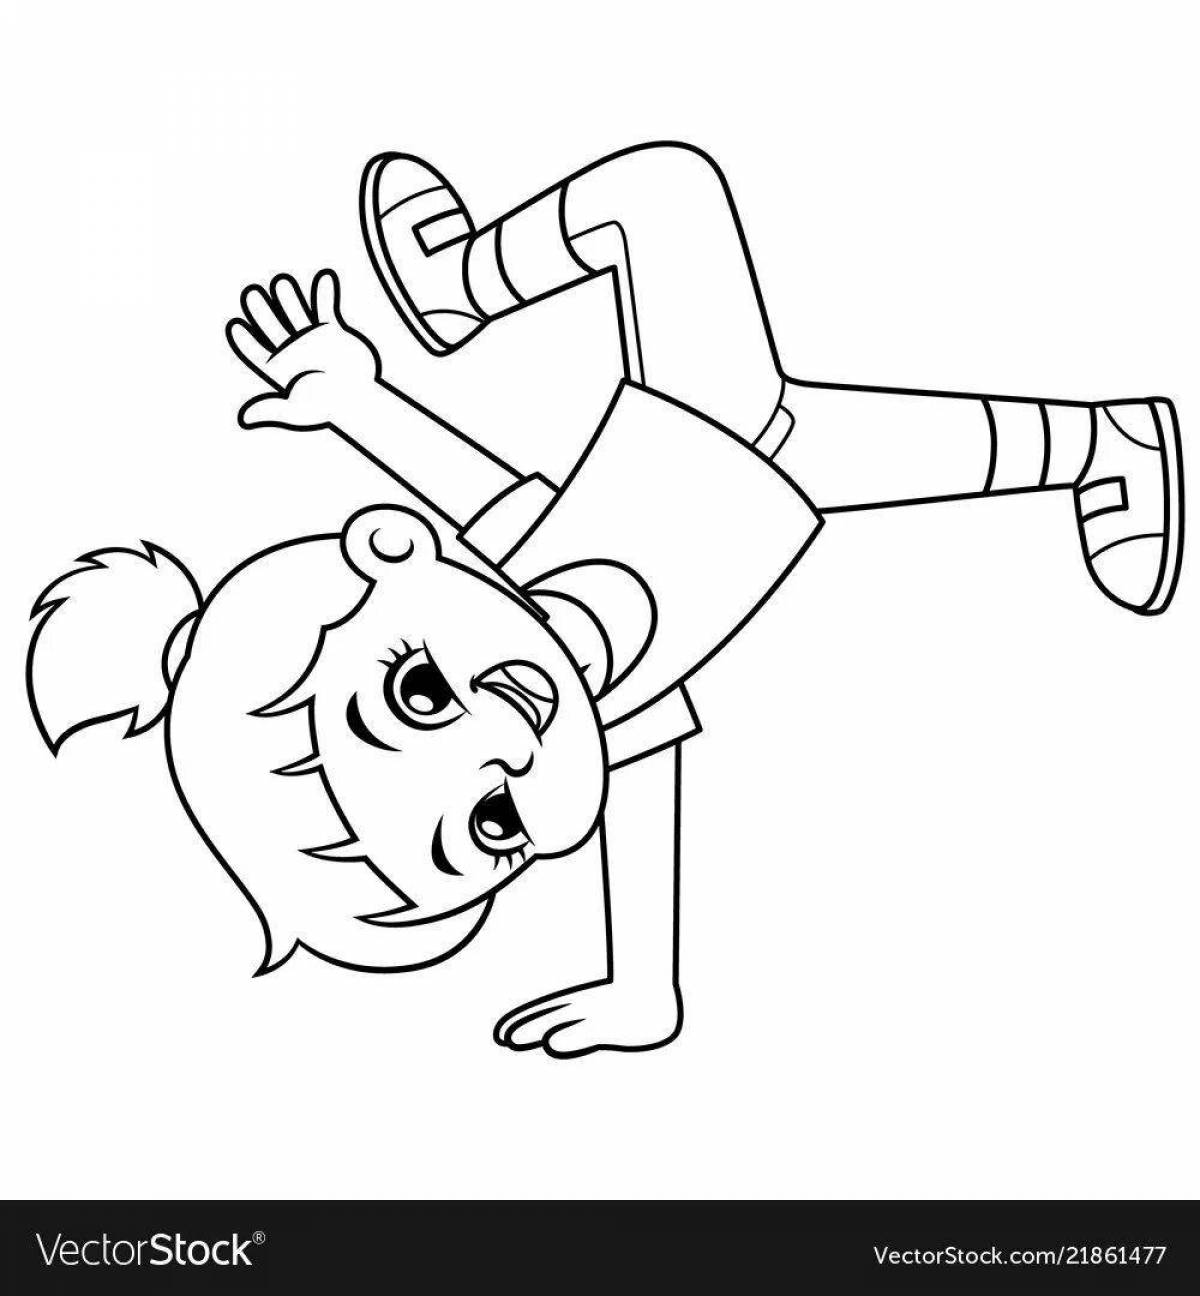 Radiant brakedance coloring page